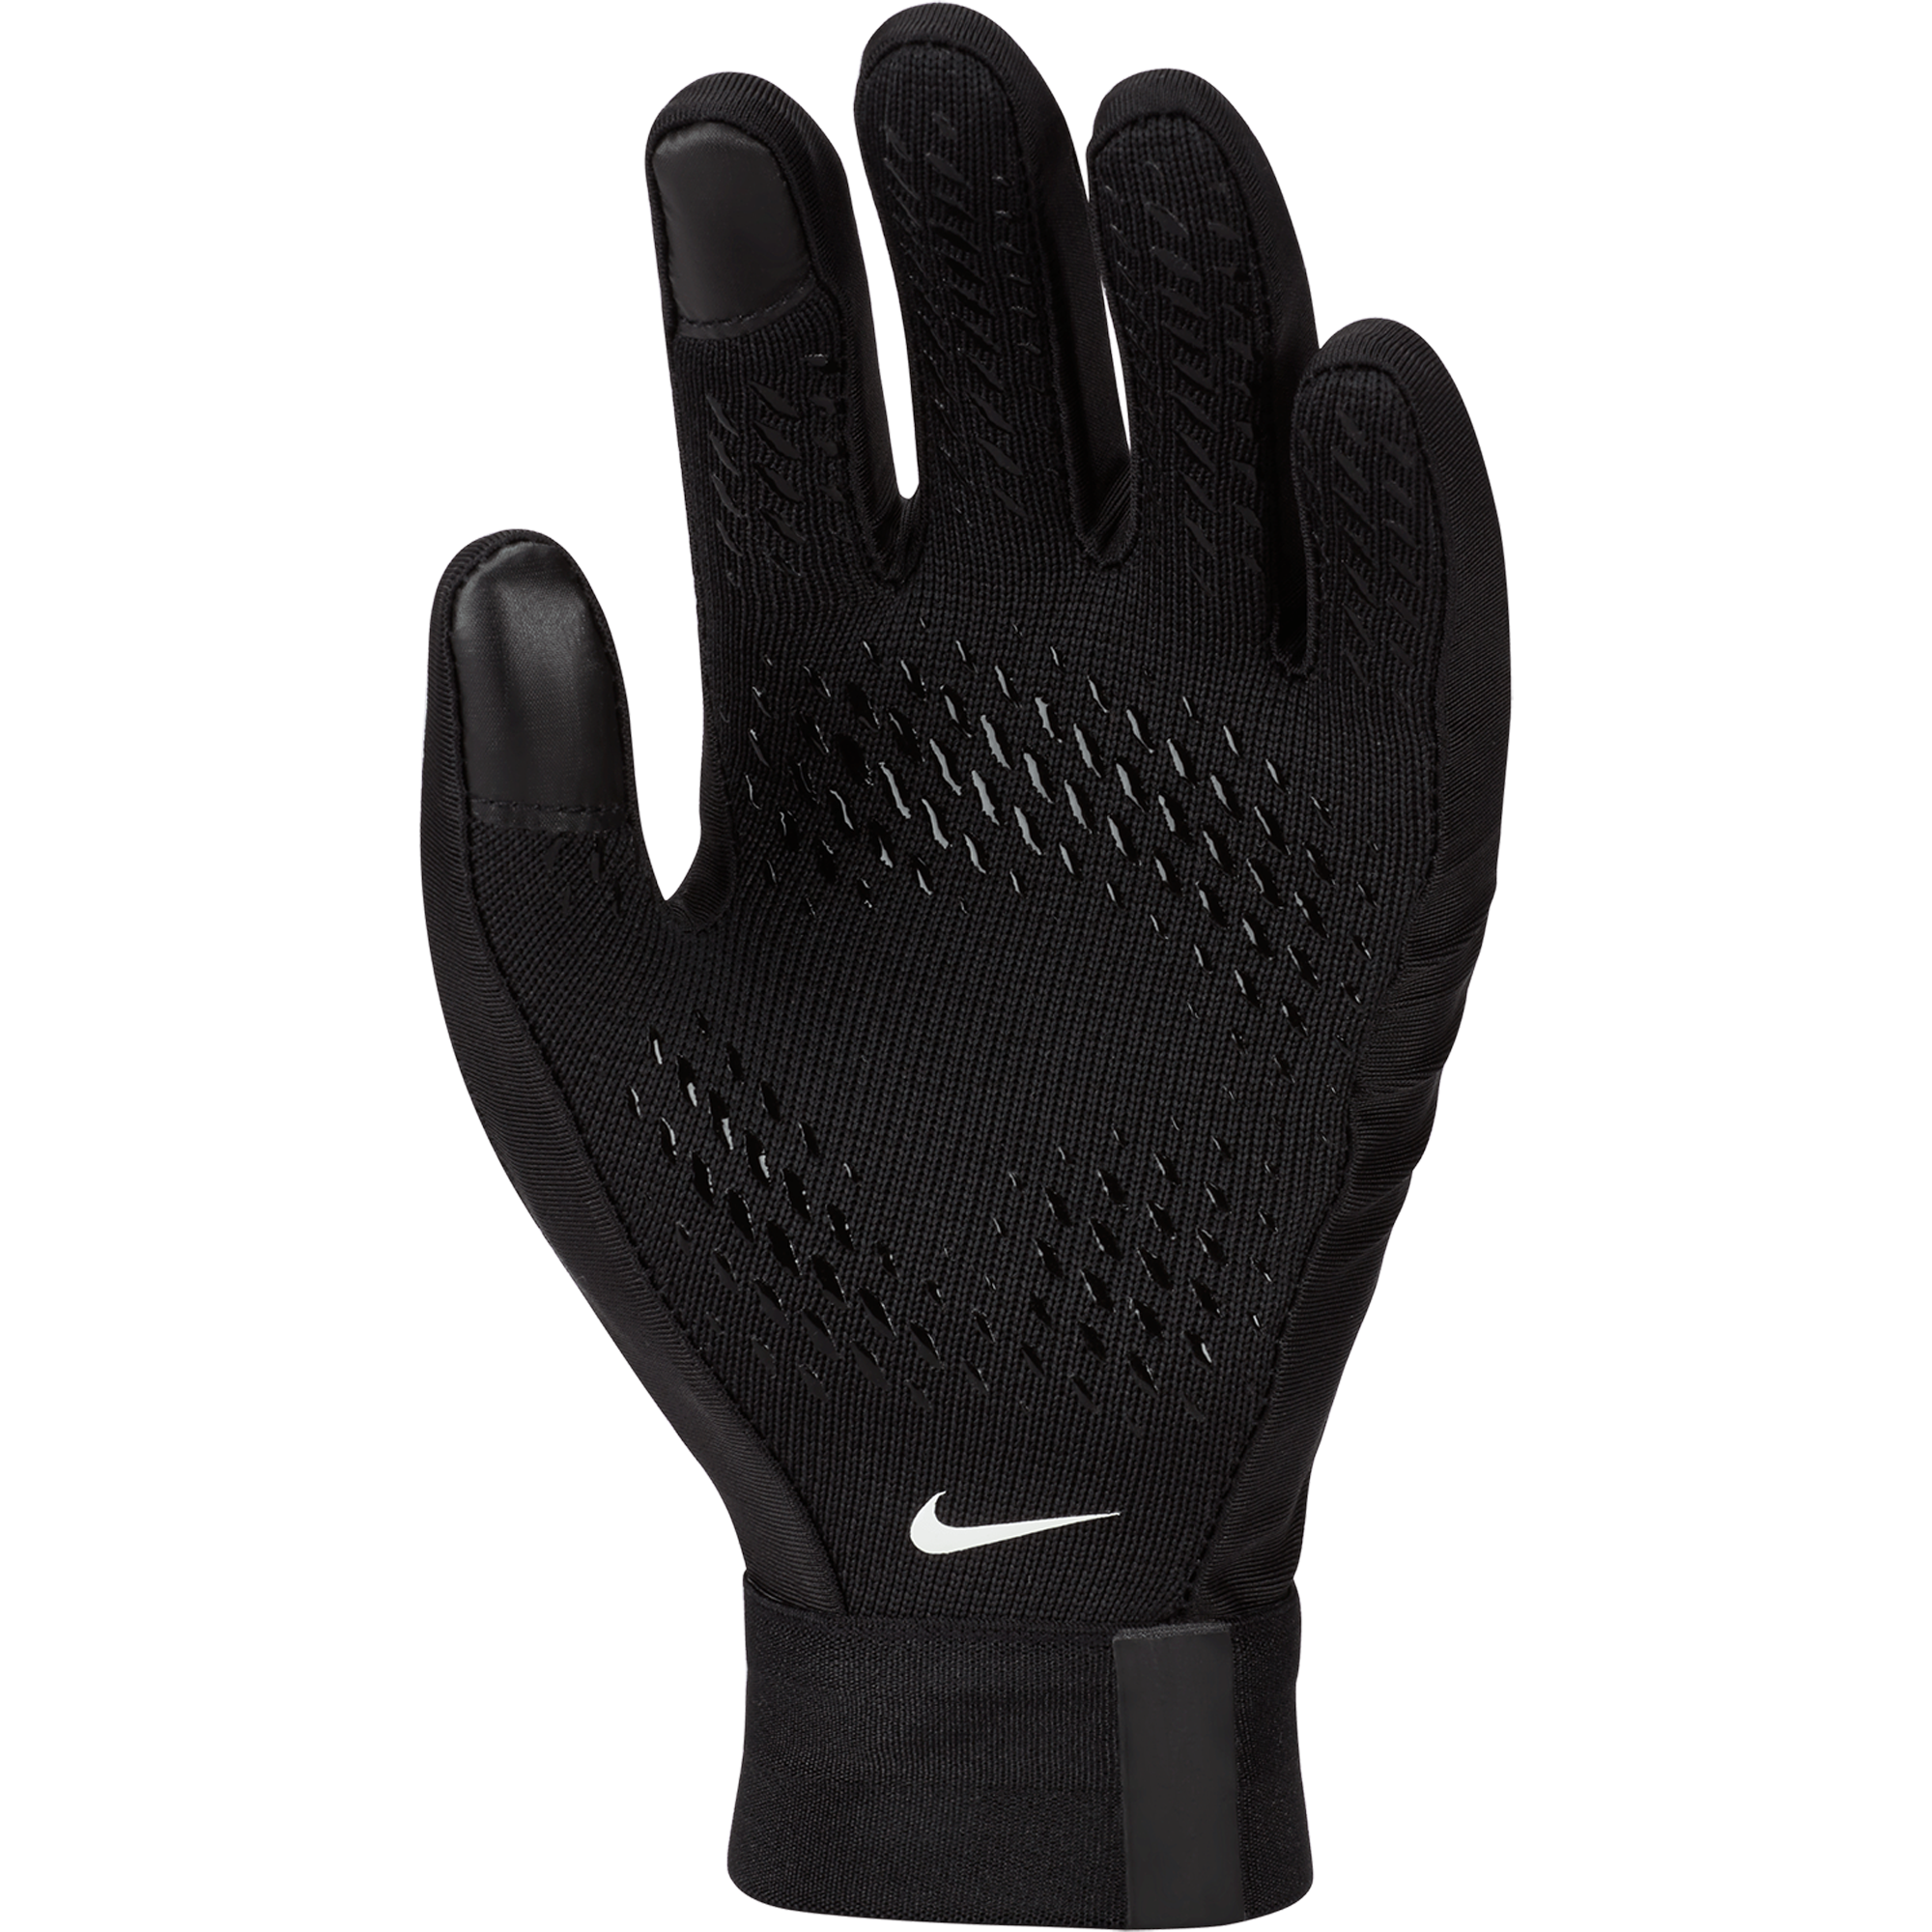 Nova - Academy Gloves Therma-FIT (Youth)